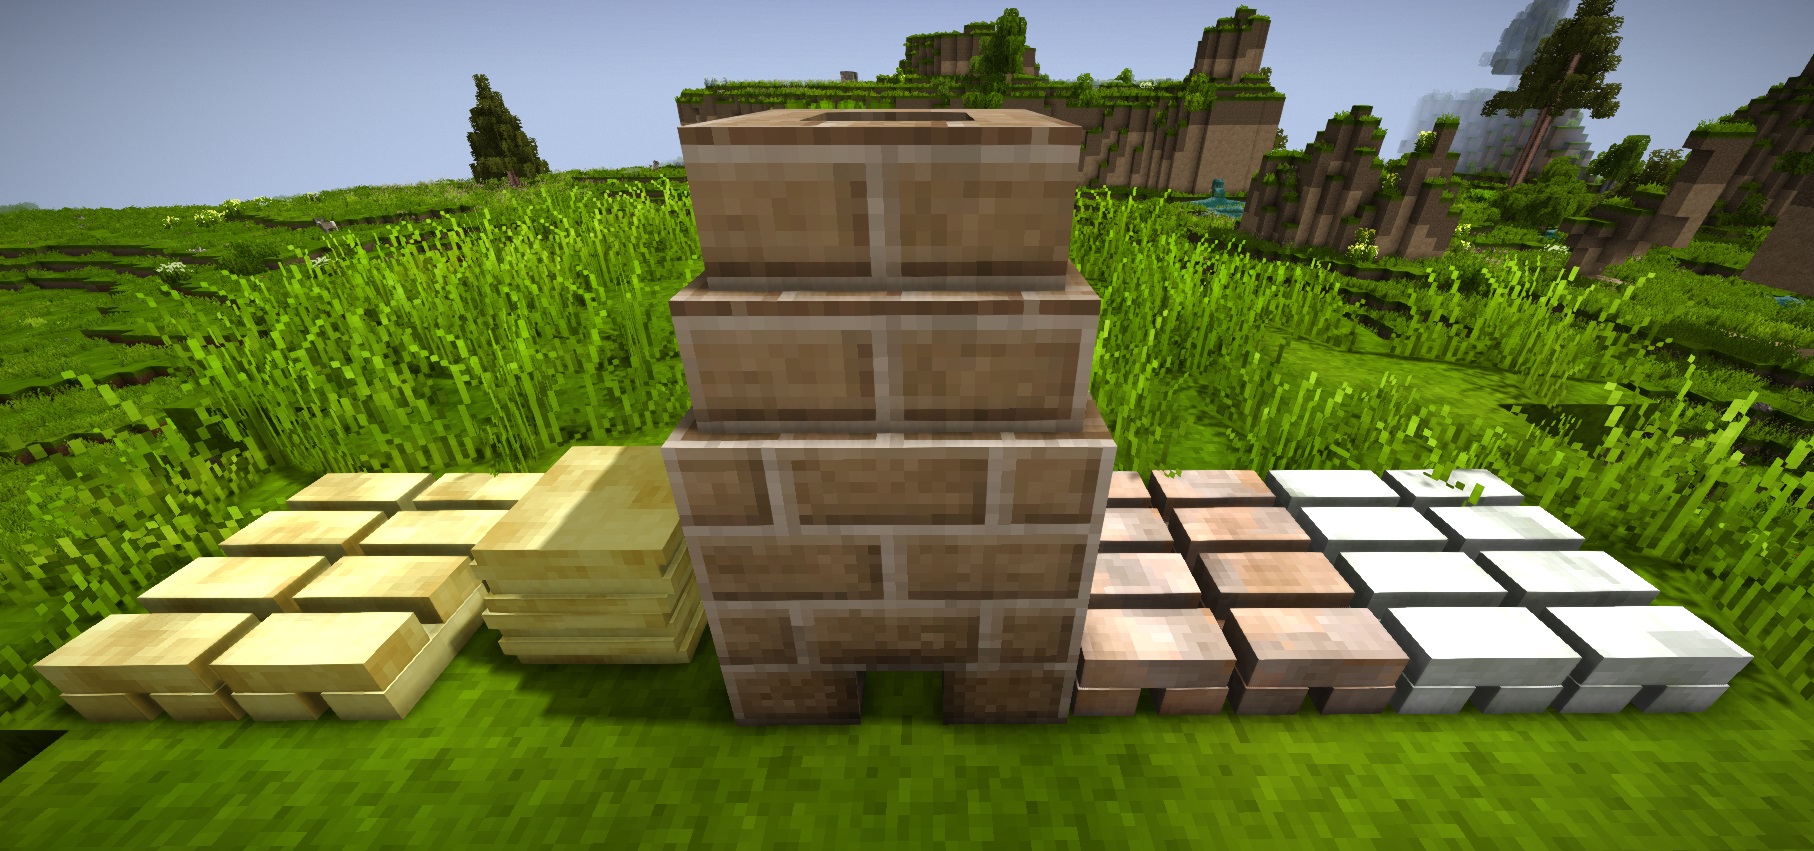 GitHub - DrPlantabyte/BaseMetals: Minecraft mod to add metals like copper and silver to Minecraft